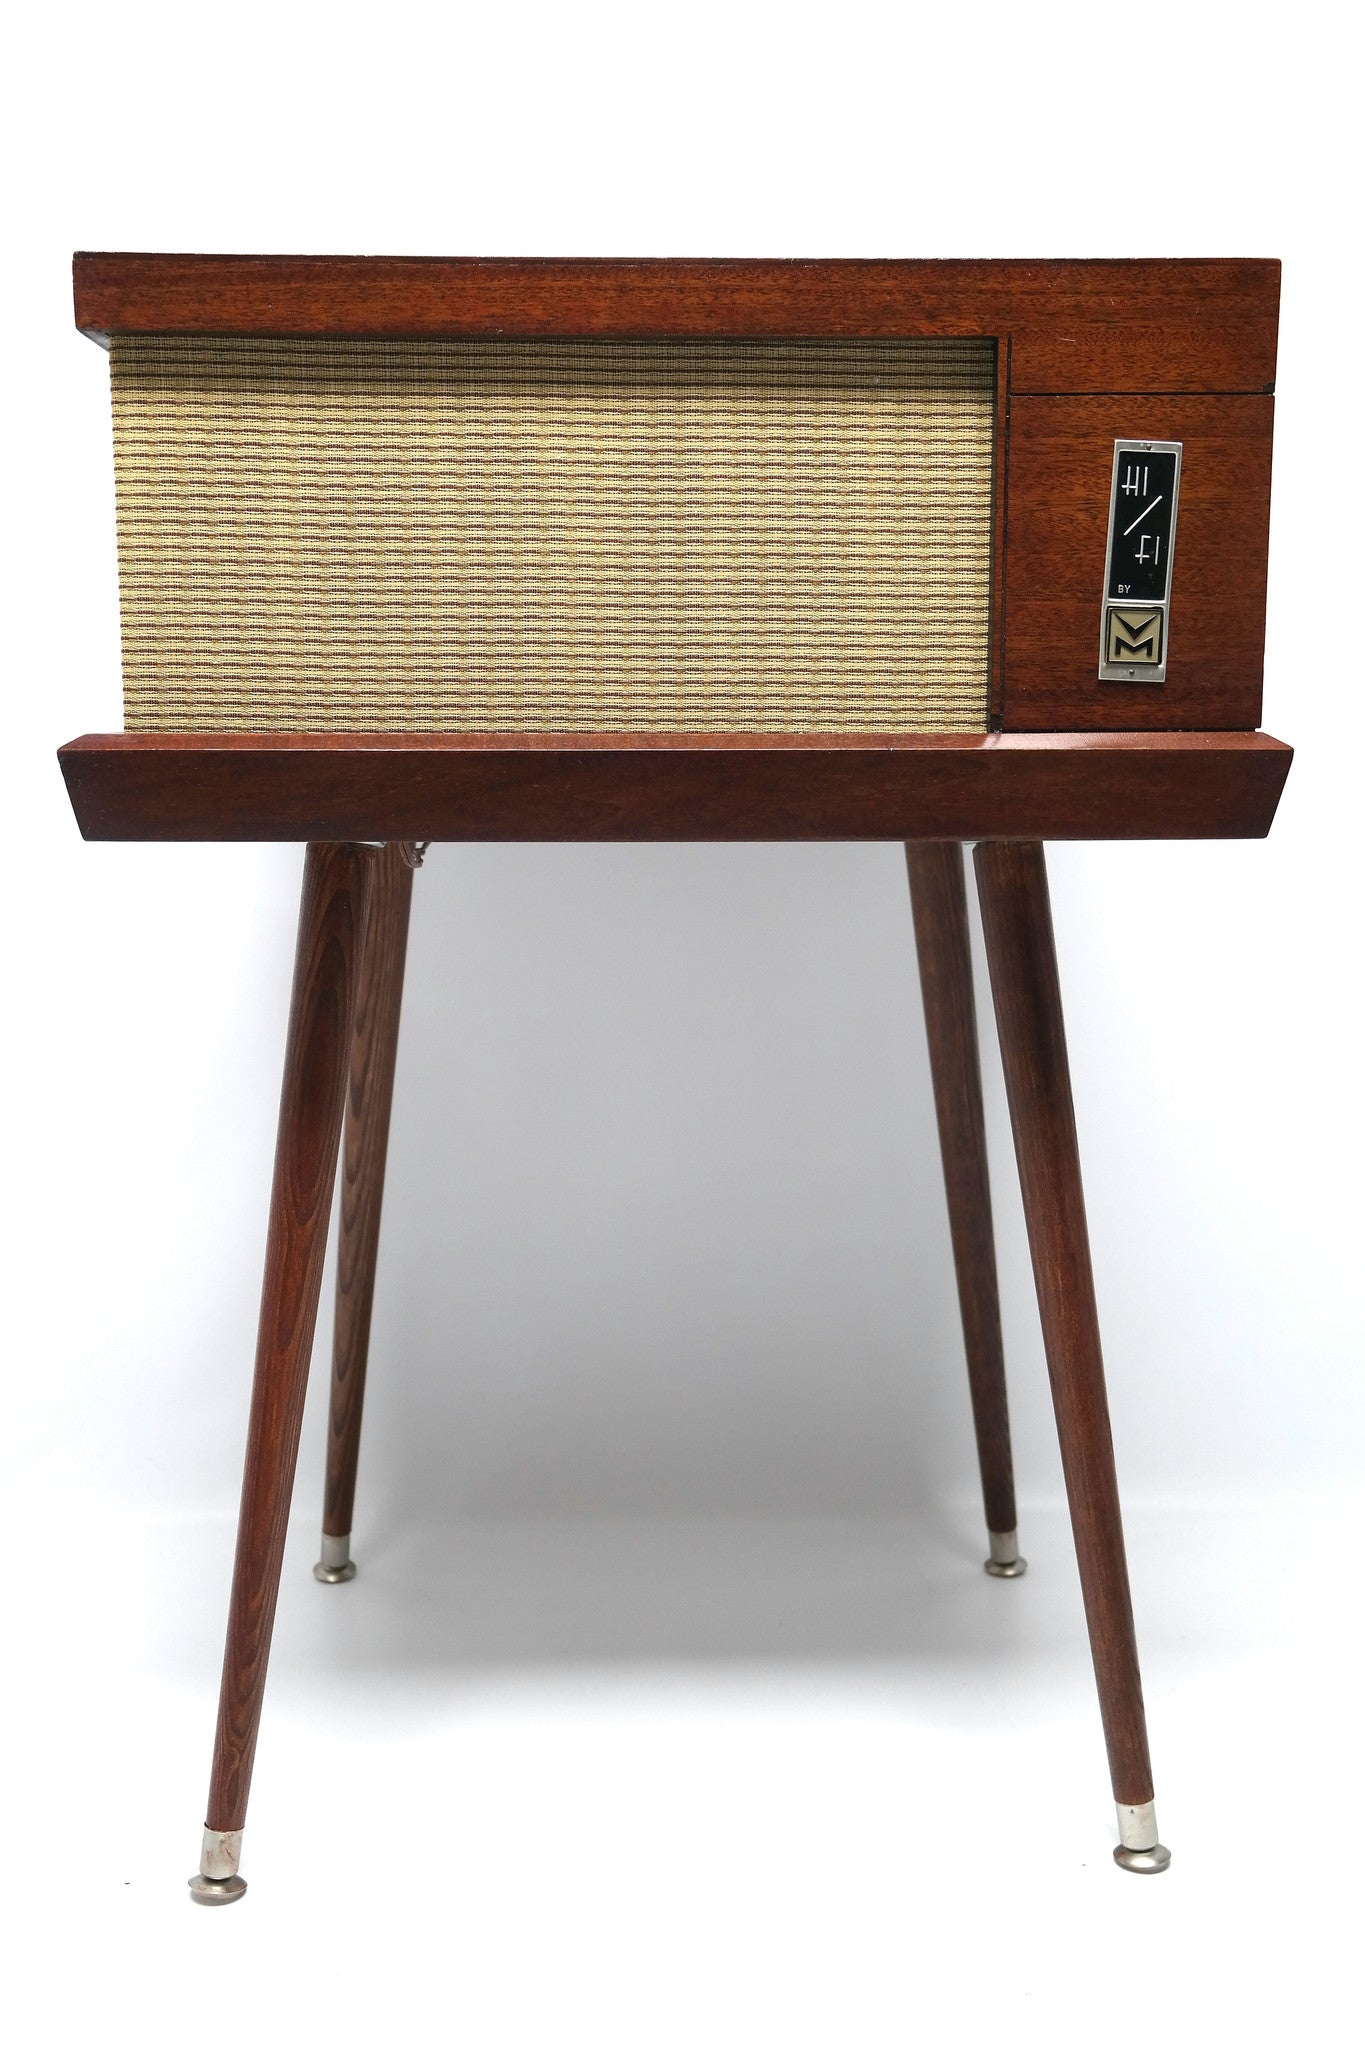 MCM STEREO - 50's - Mid Century Modern Stereo Consolette Voice of Music Record Player Bluetooth The Vintedge Co.